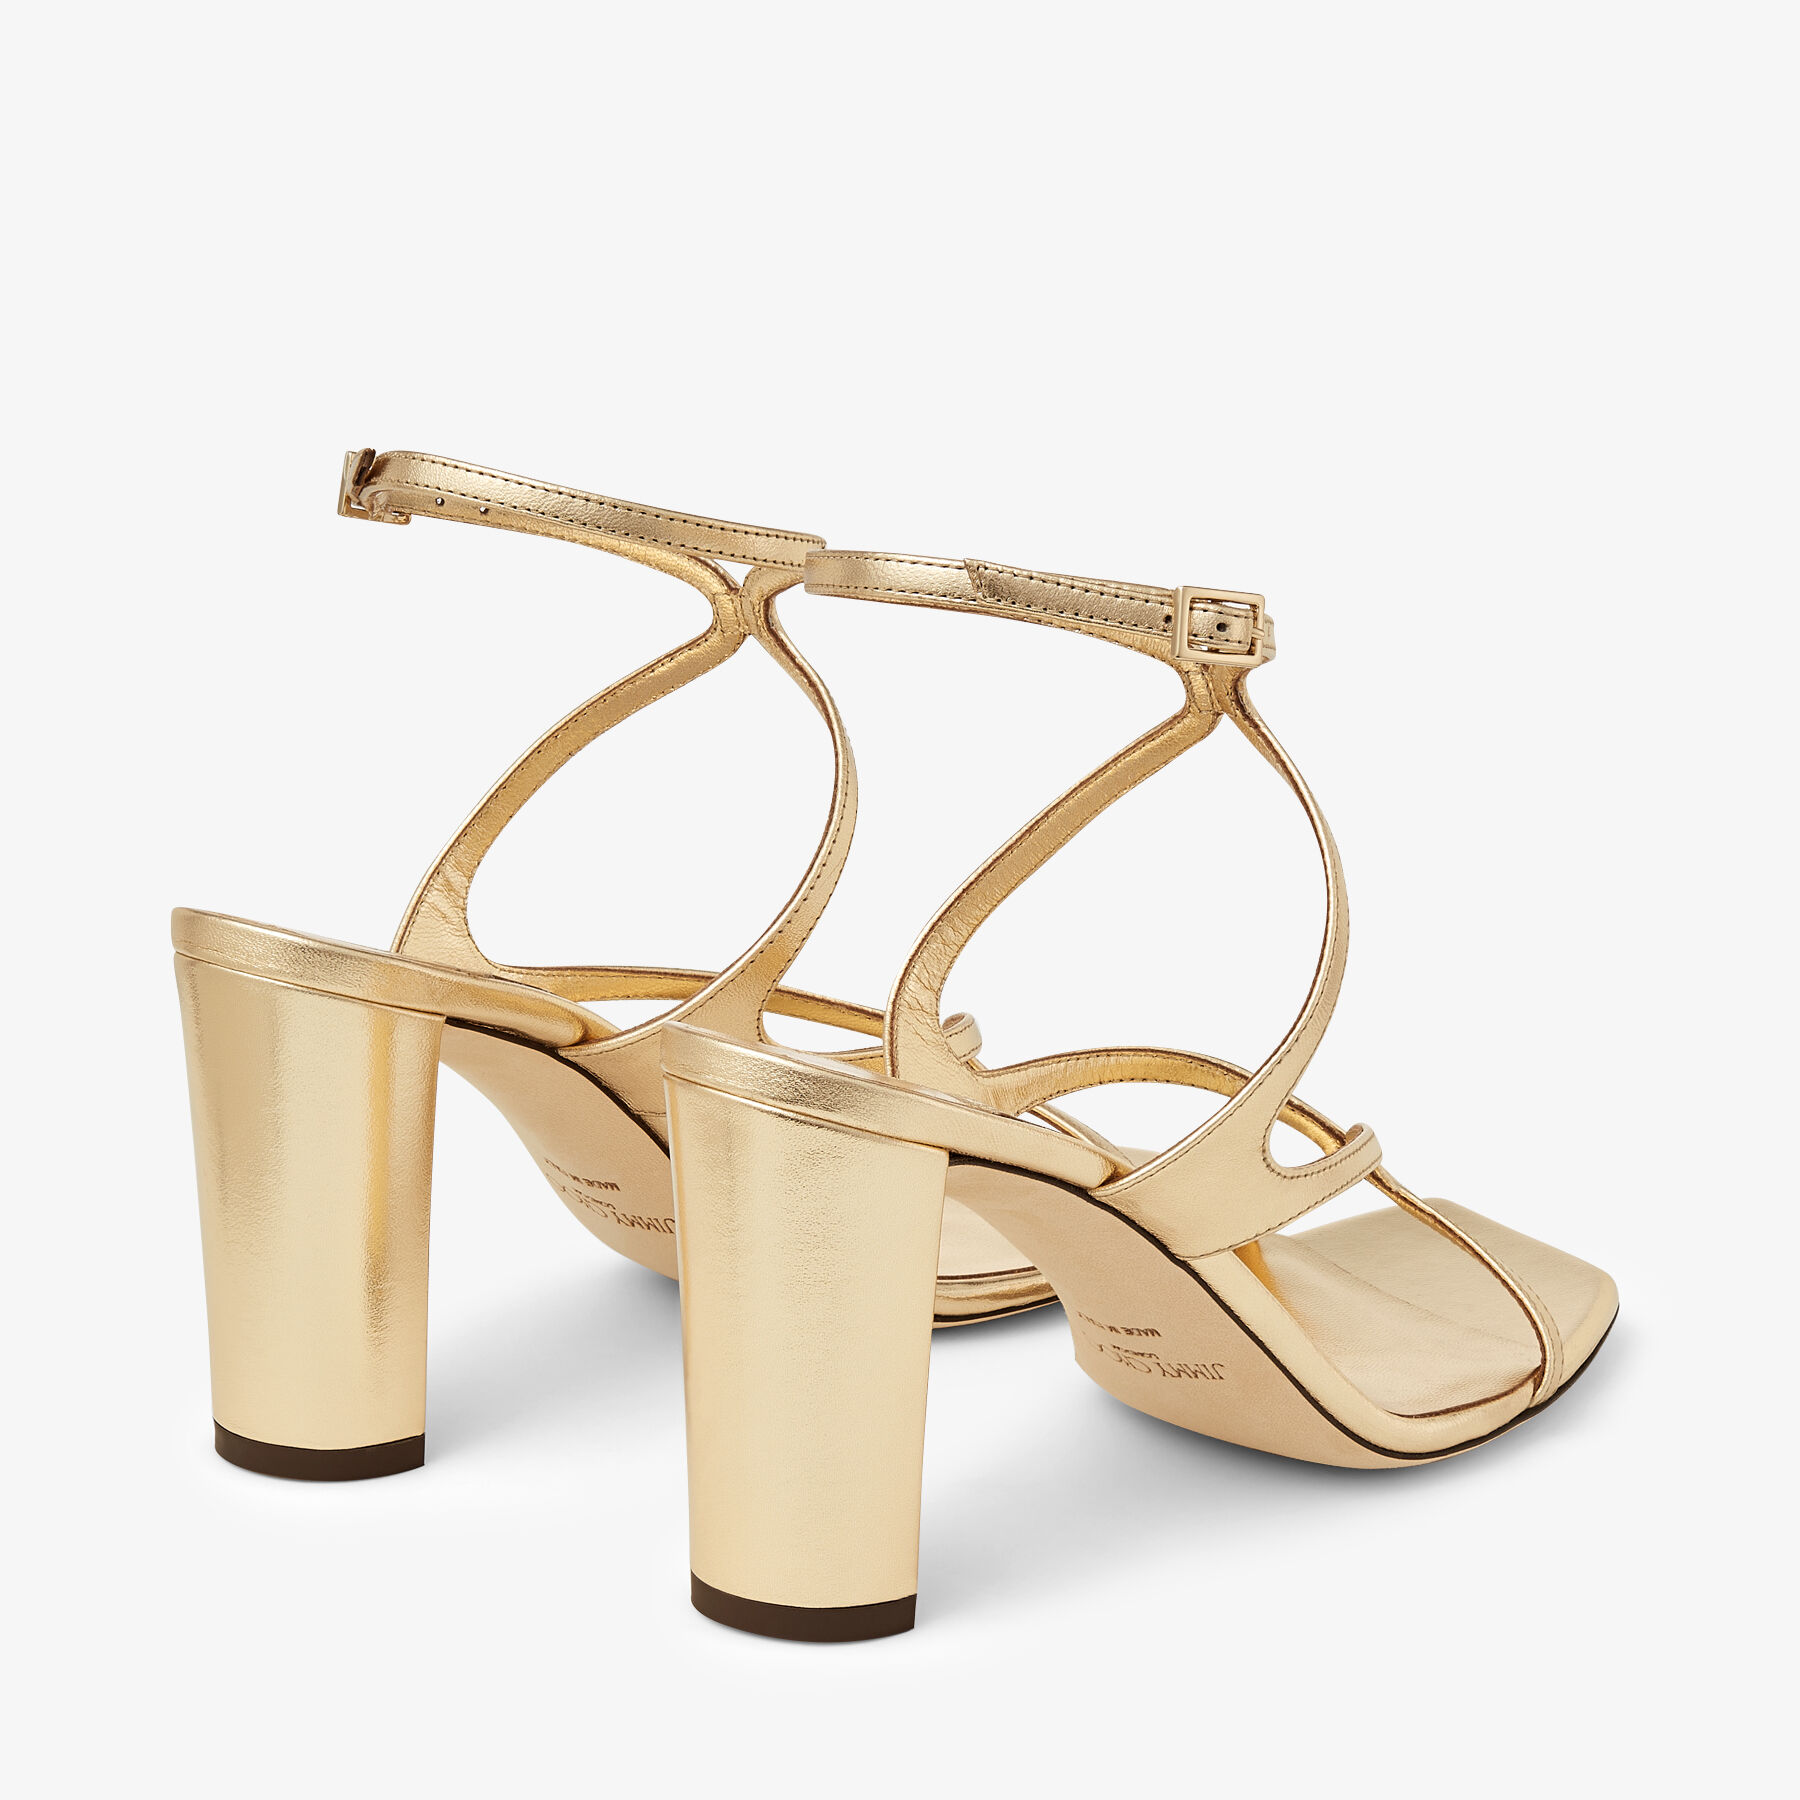 Azie 85 | Gold Metallic Nappa Leather Sandals | New Collection 